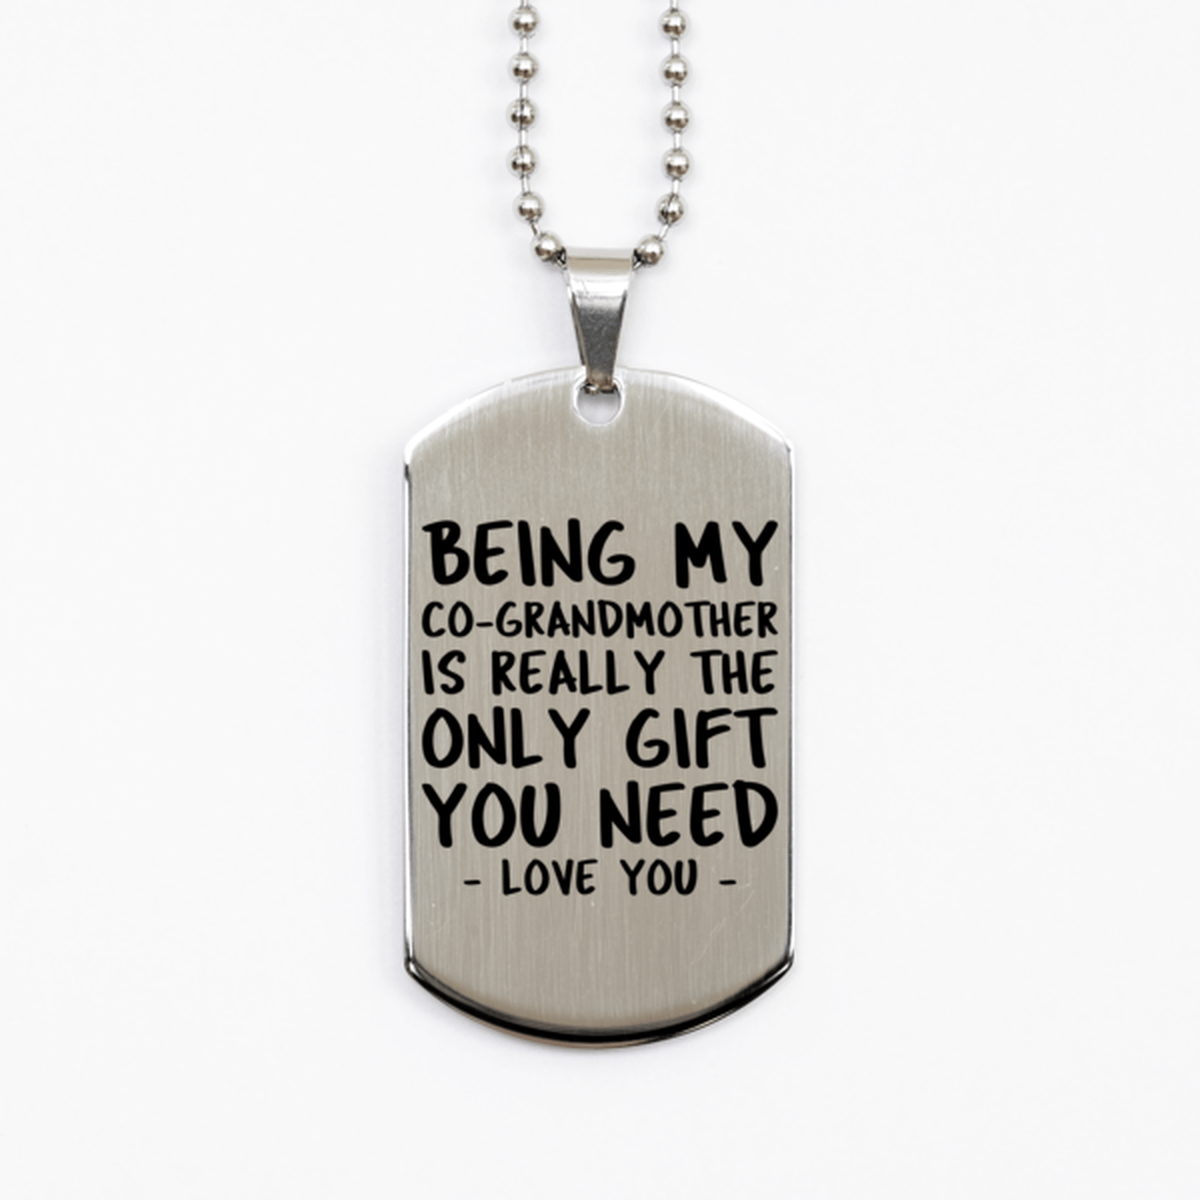 Funny Co-grandmother Silver Dog Tag Necklace, Being My Co-grandmother Is Really the Only Gift You Need, Best Birthday Gifts for Co-grandmother